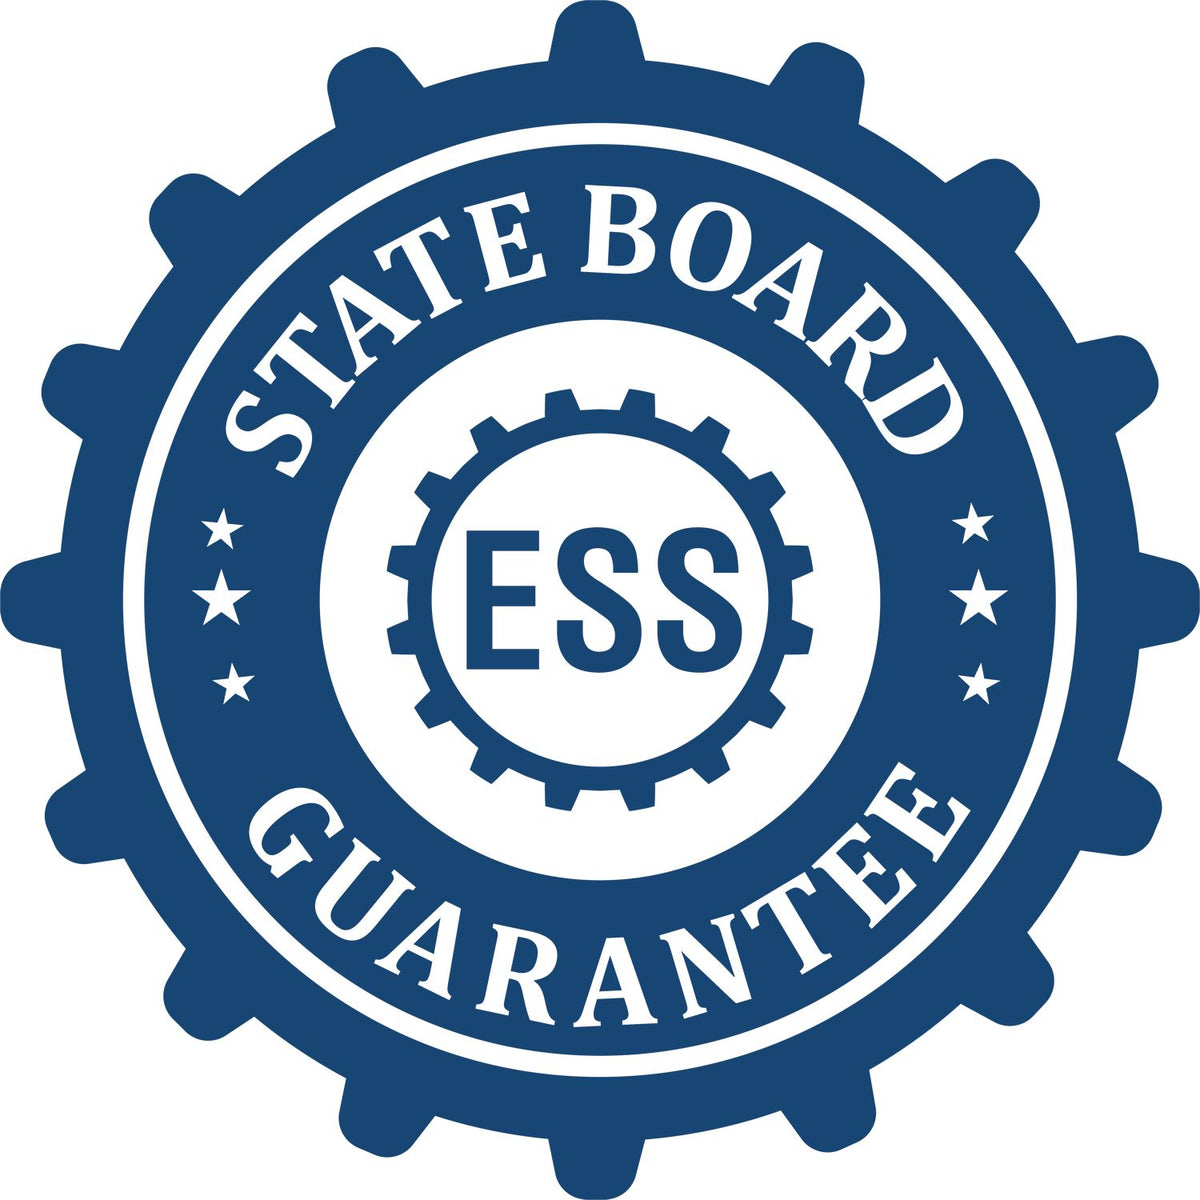 An emblem in a gear shape illustrating a state board guarantee for the Wooden Handle Texas State Seal Notary Public Stamp product.